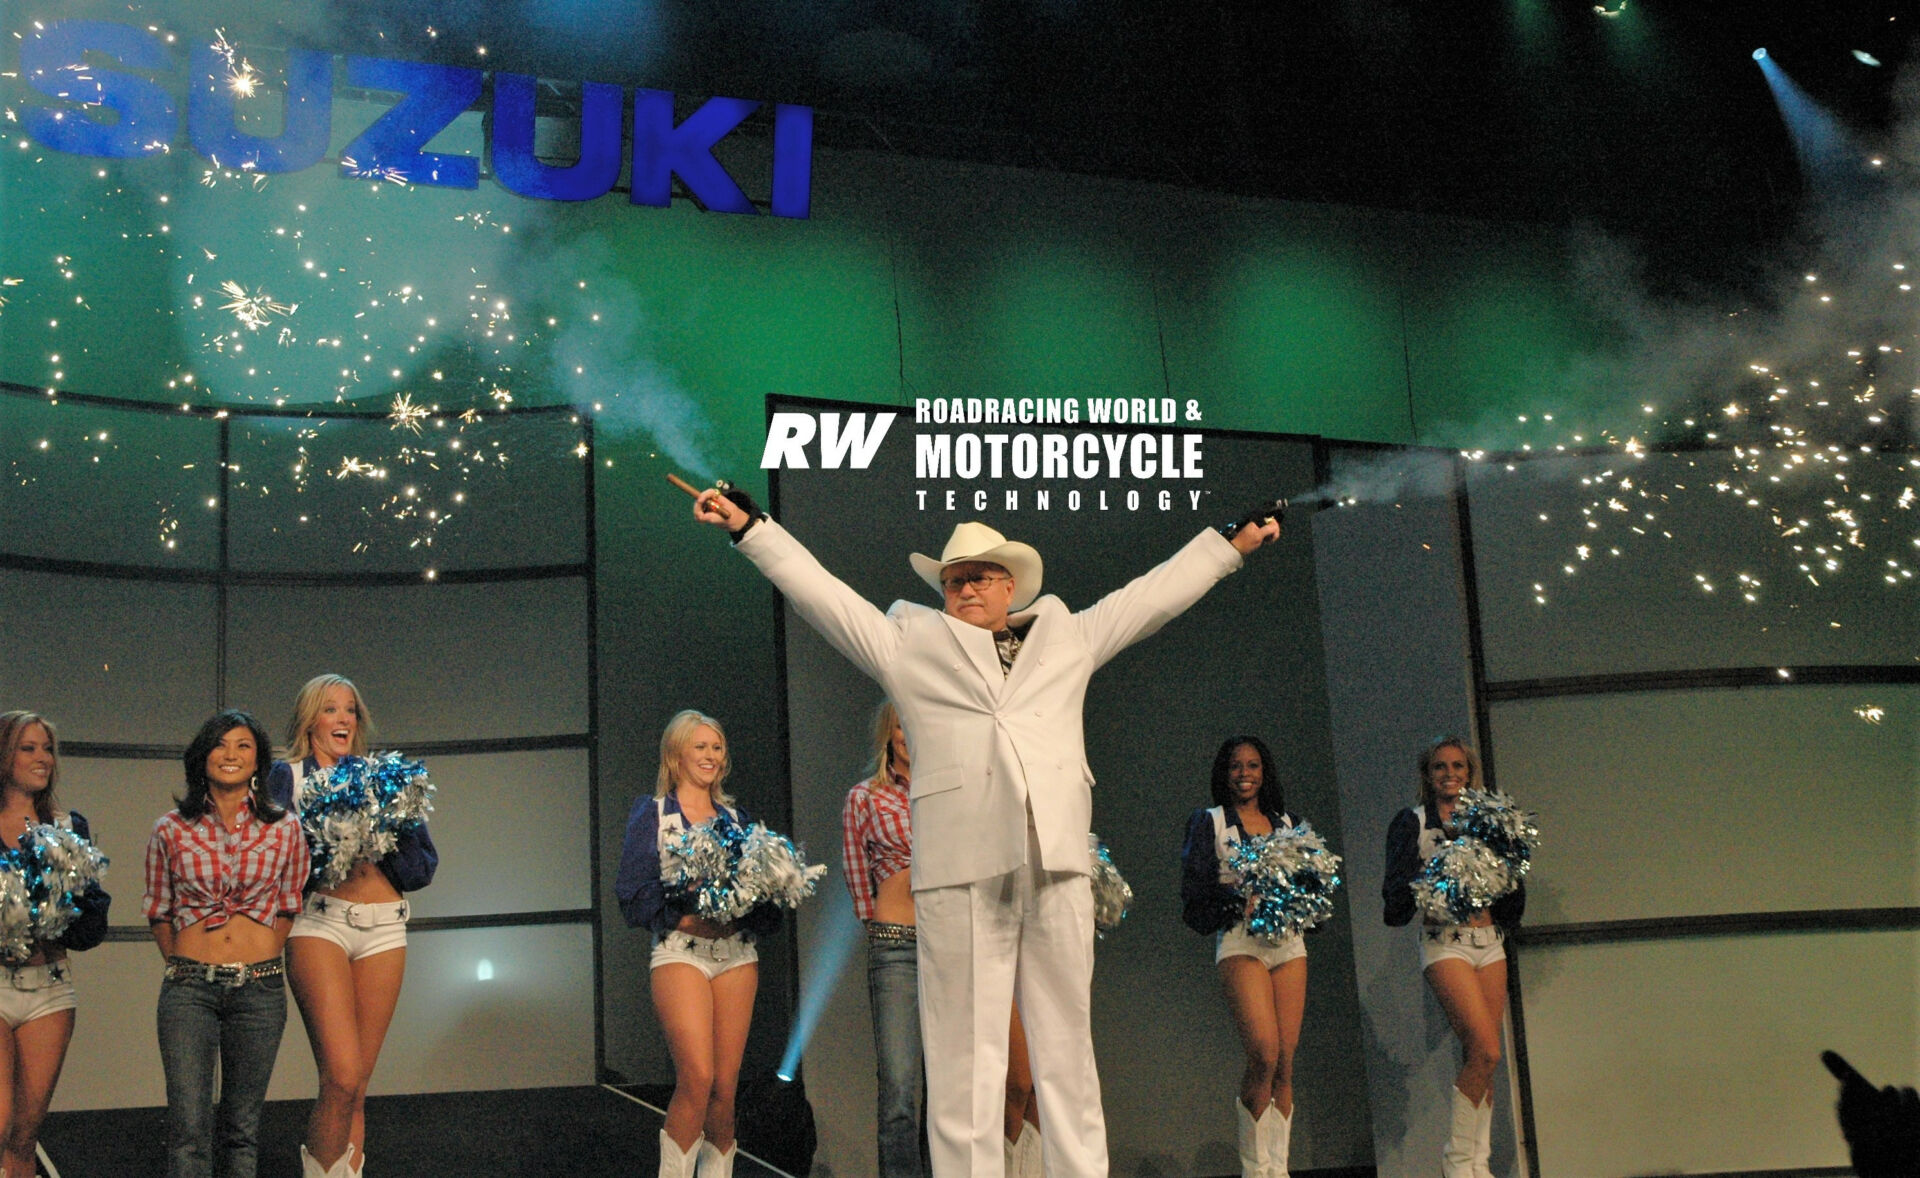 Mel Harris, as seen dressed in costume as TV show character Boss Hog at the Suzuki National Dealer Convention in Las Vegas in 2005. Photo by David Swarts.